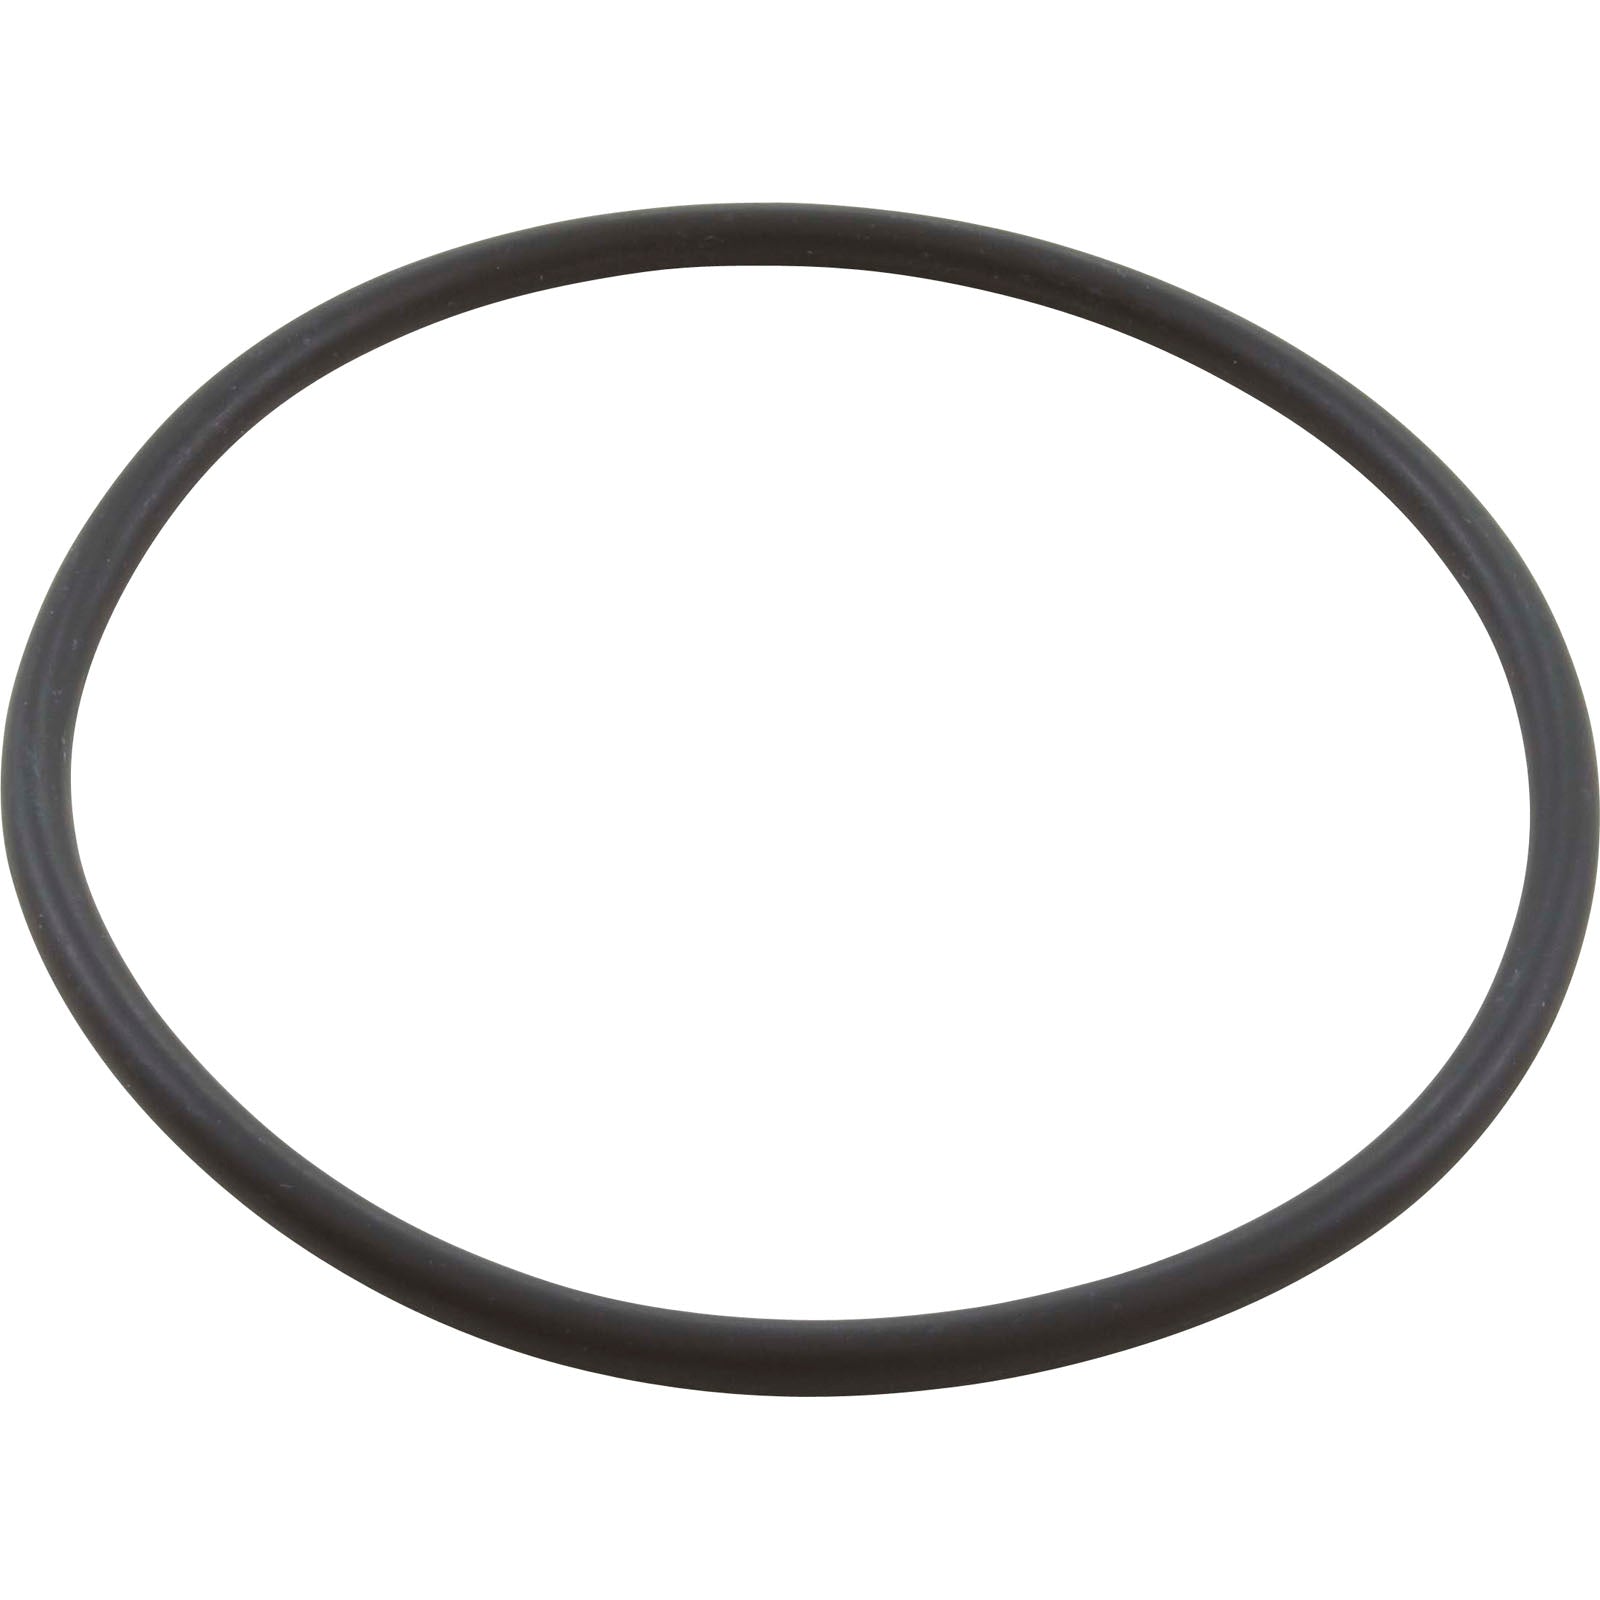 O-Ring, Speck A91, Lid, O-15/ 2901341220